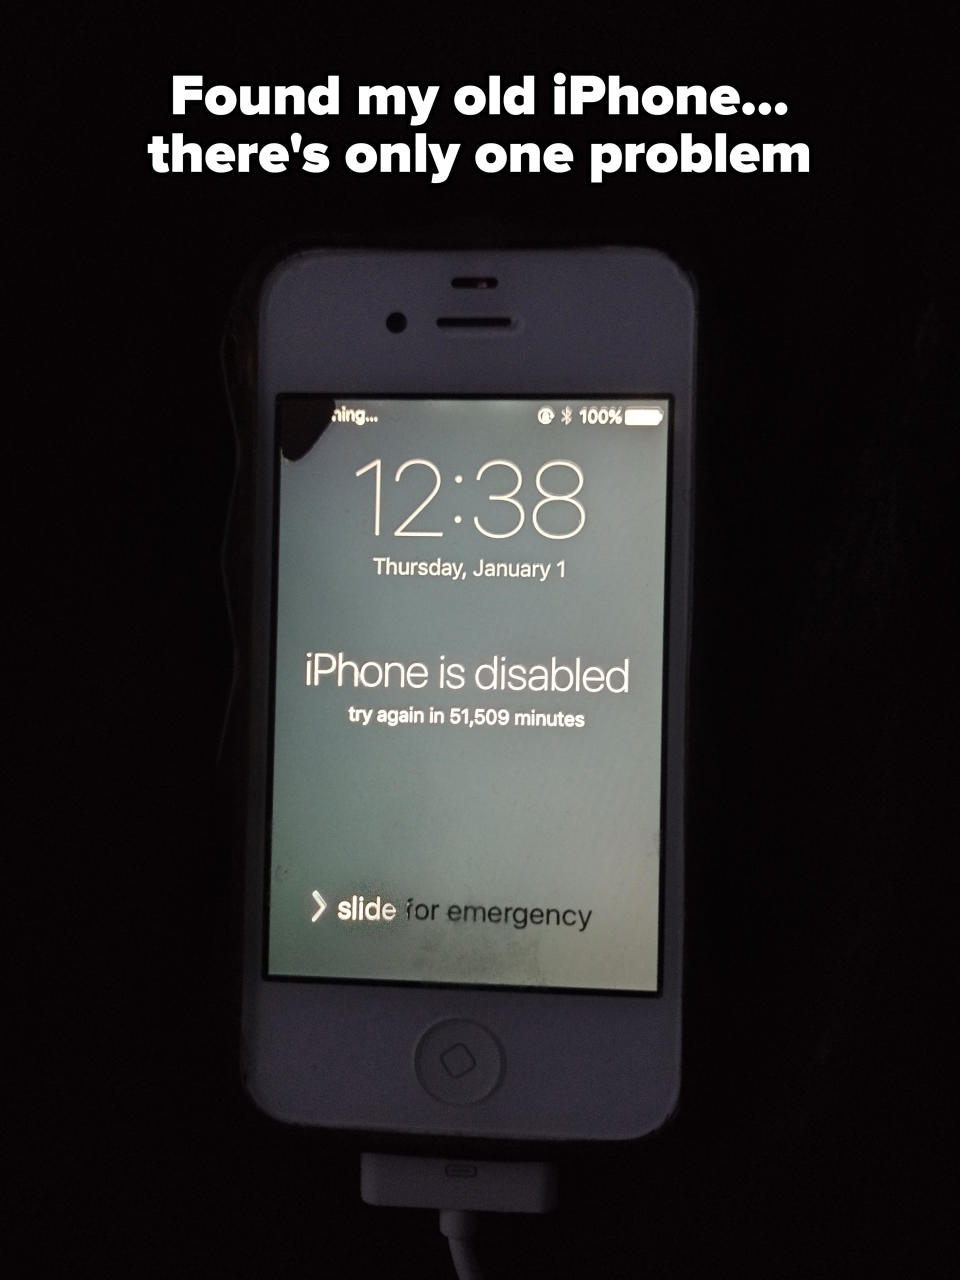 iPhone screen displaying "iPhone is disabled, try again in 61,509 minutes" with emergency call slider